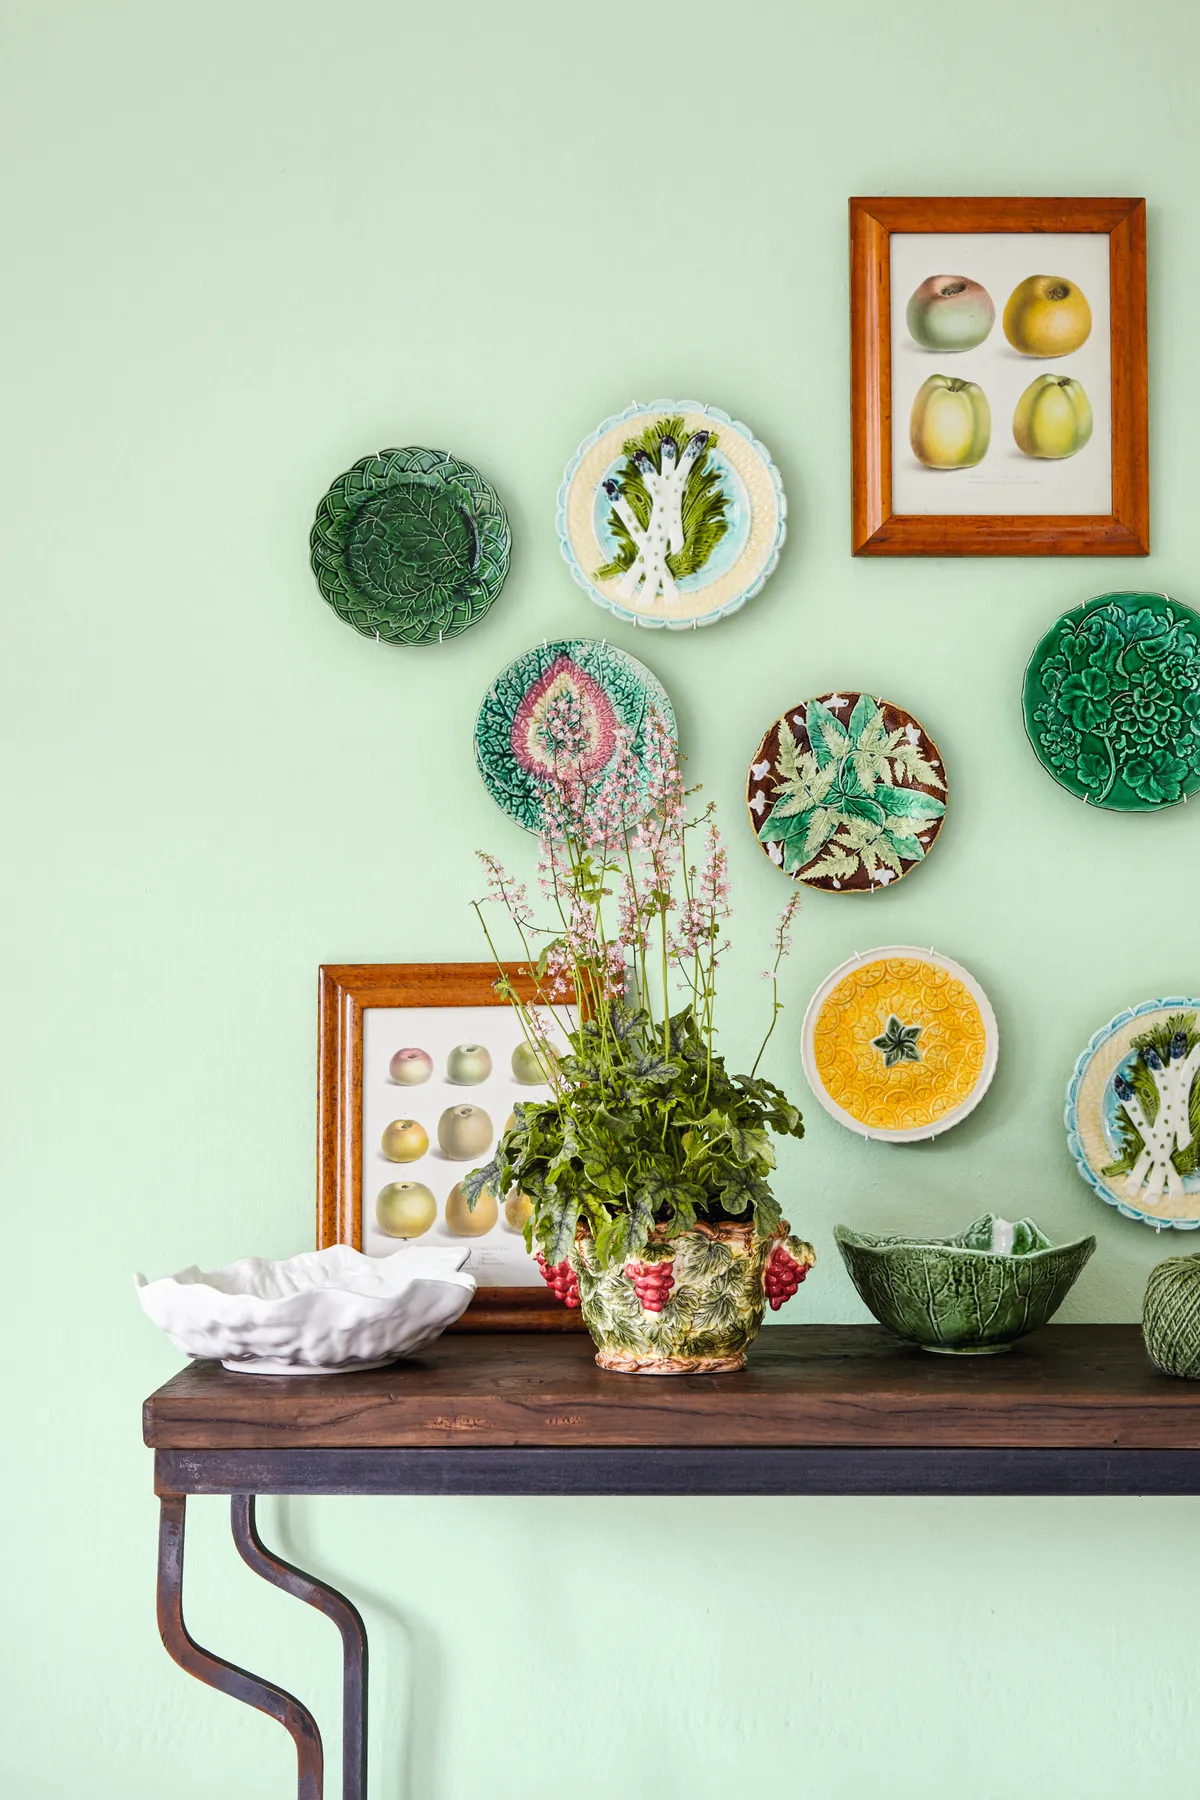 Create a welcoming hallway with a decorative display of plates and bowls in complementary shades. Pair with vintage botanical prints for a cohesive look.